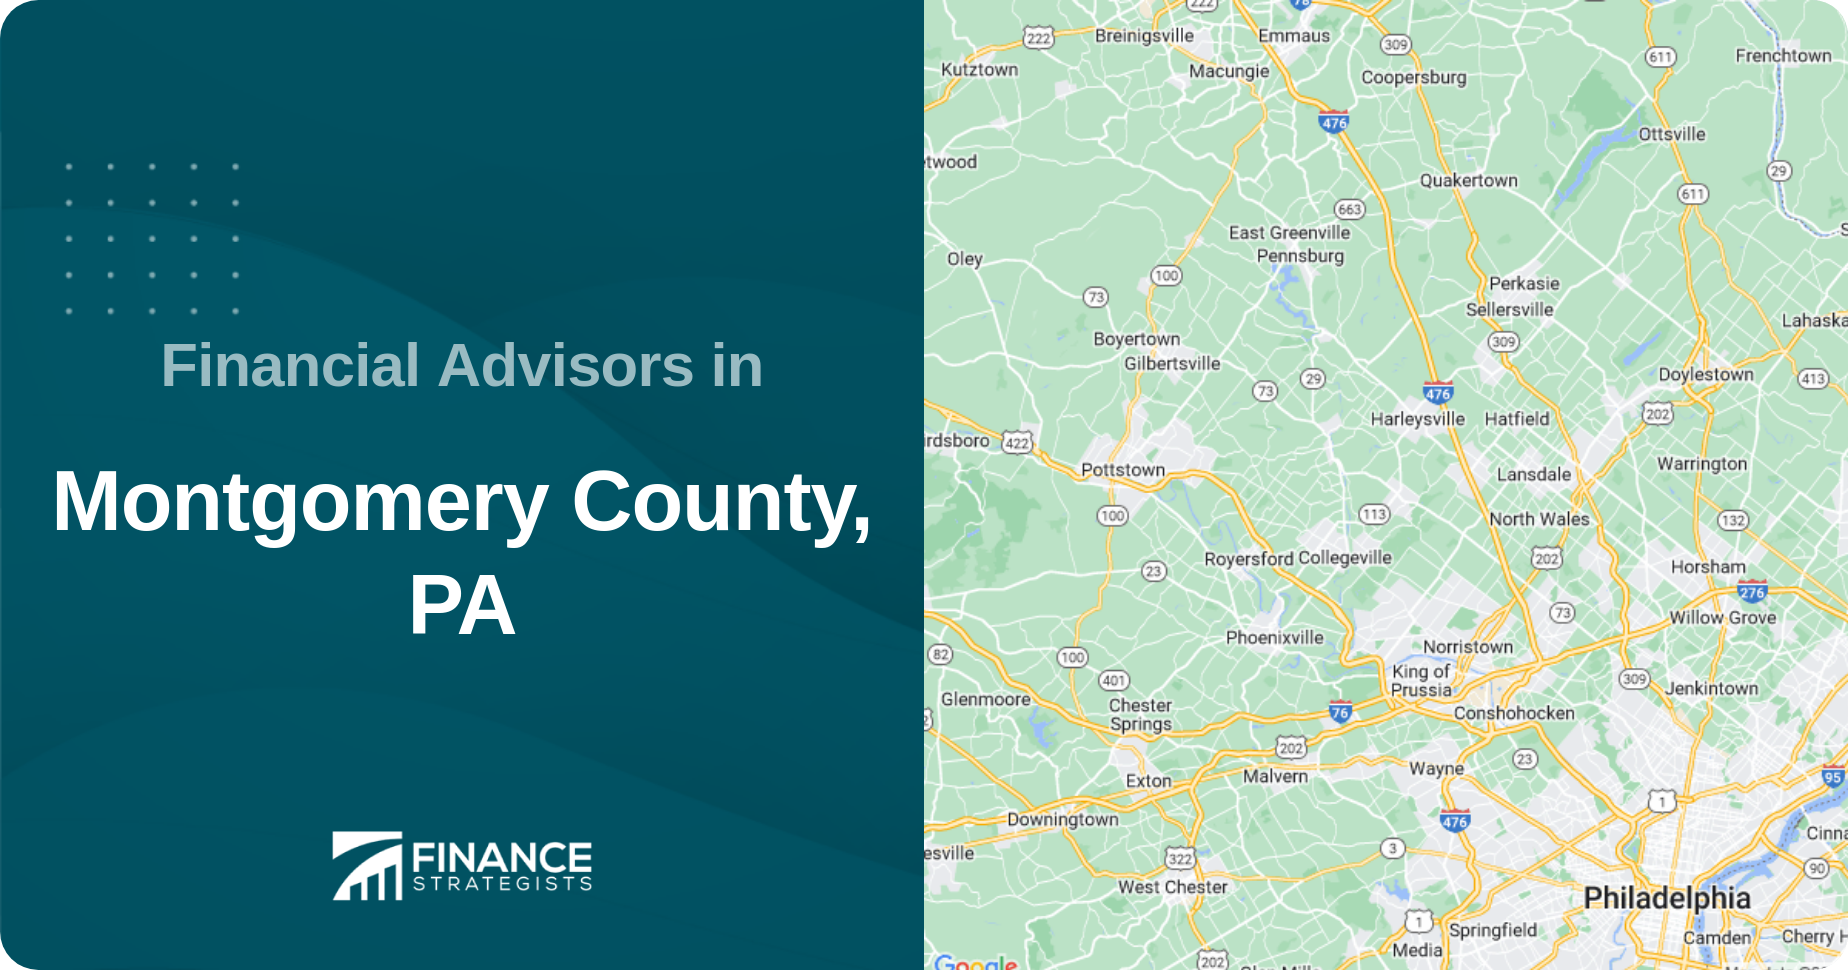 Financial Advisors in Montgomery County, PA